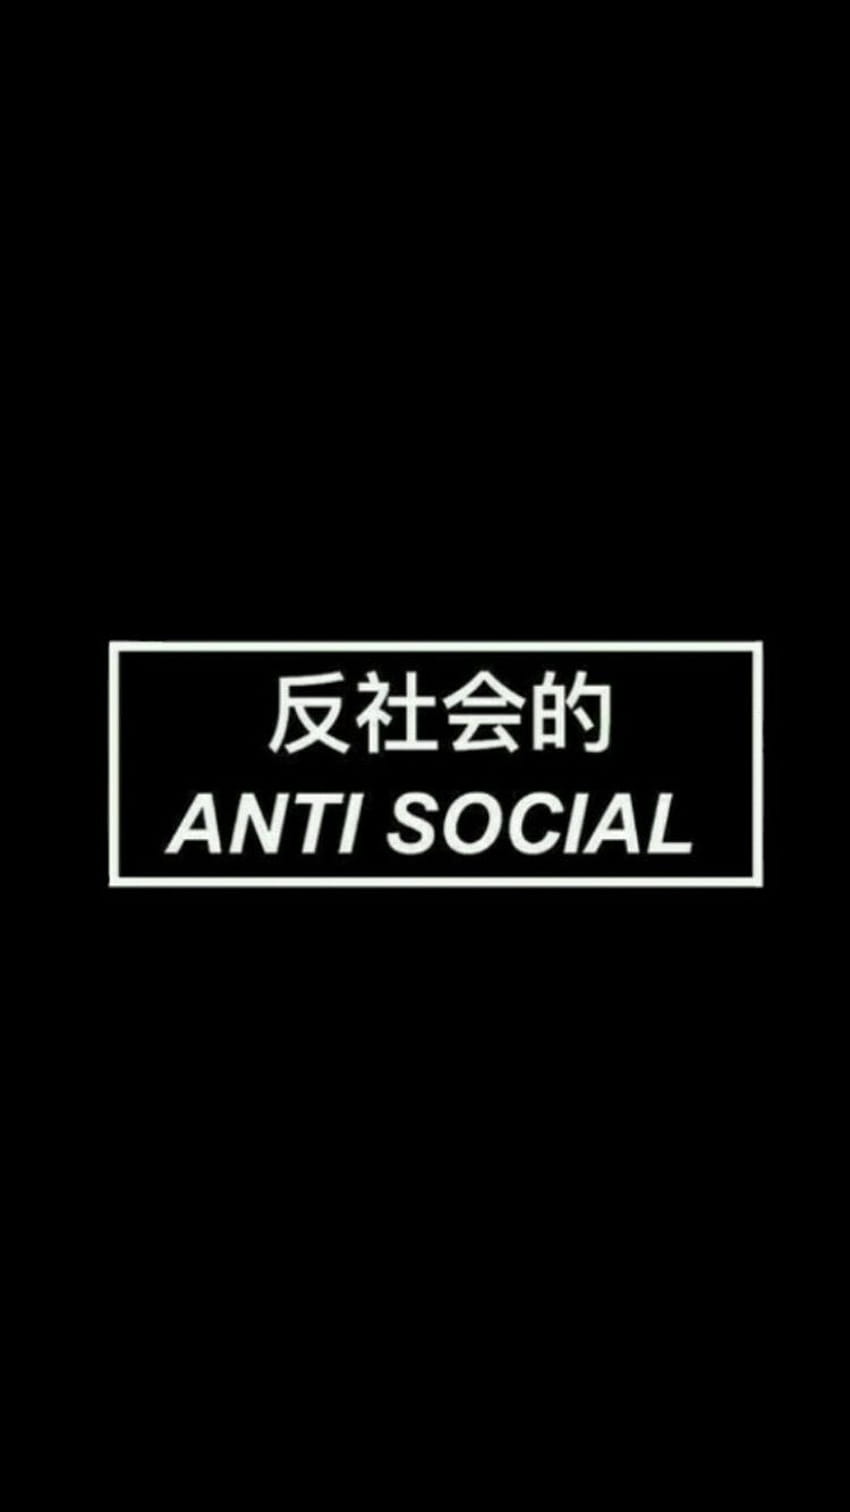 Antisocial  IPhone Wallpapers  iPhone Wallpapers